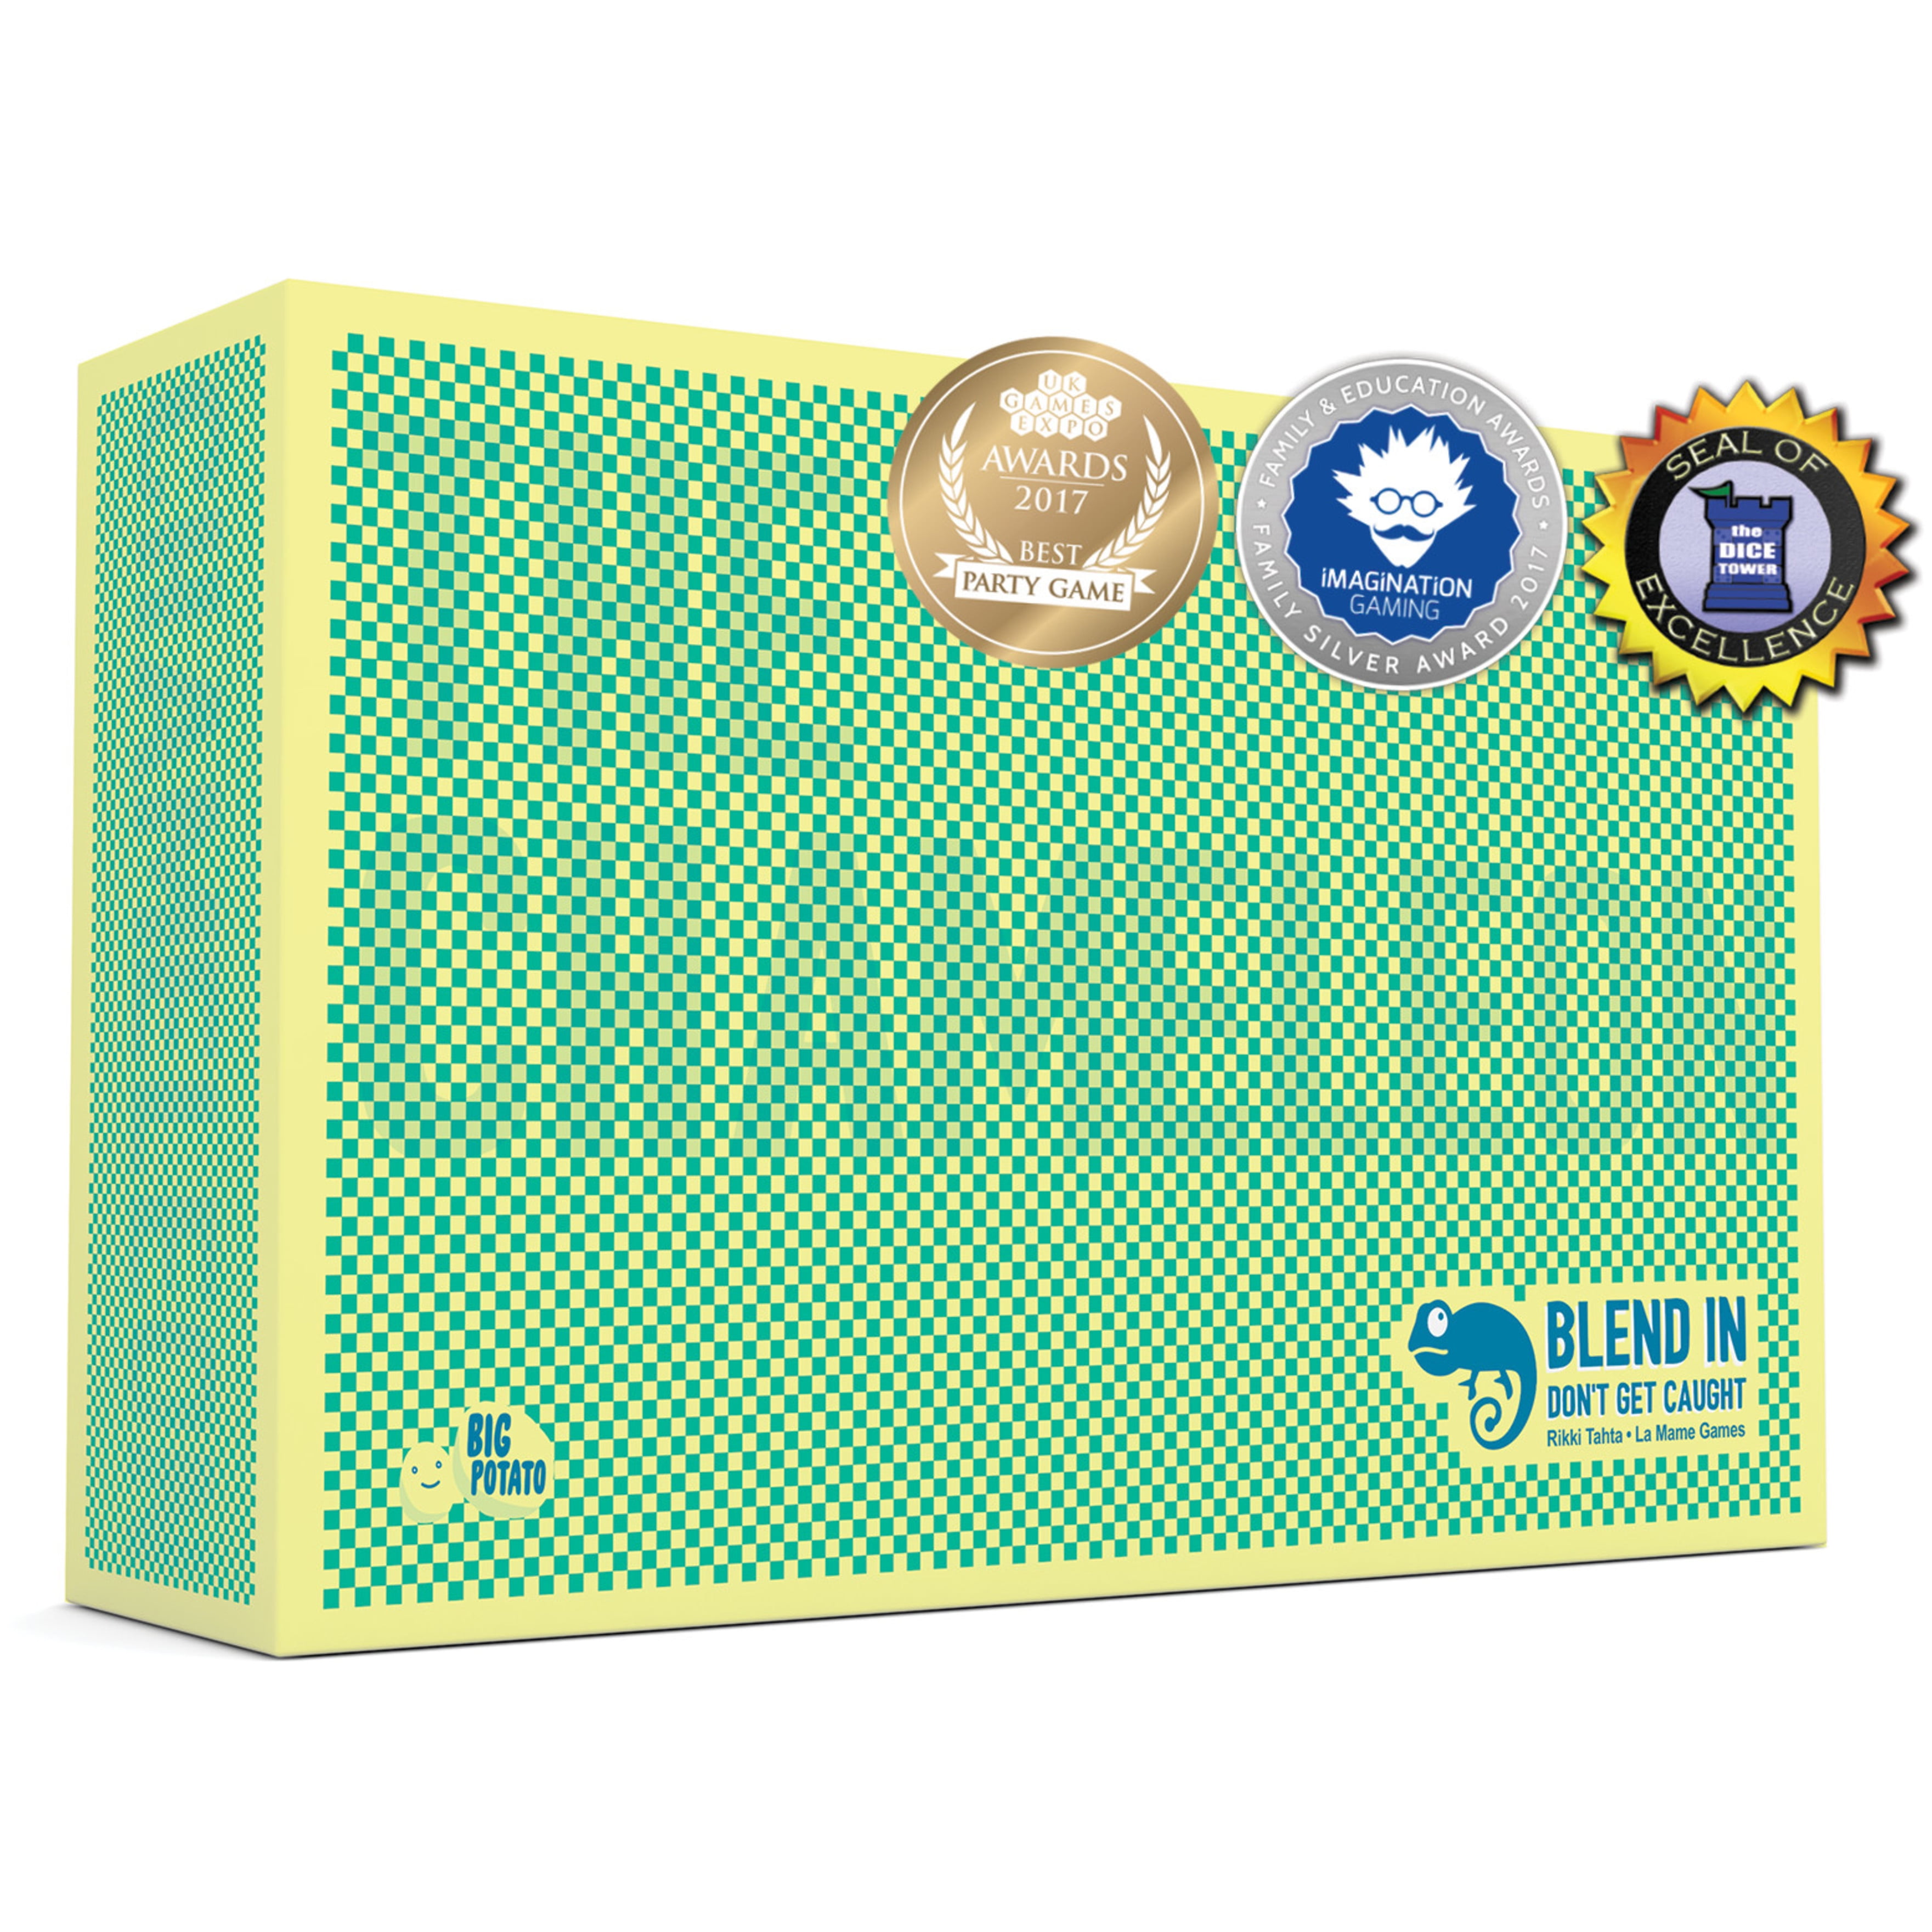 The Chameleon, Multi Award-Winning Board Game, for Ages 14 and up